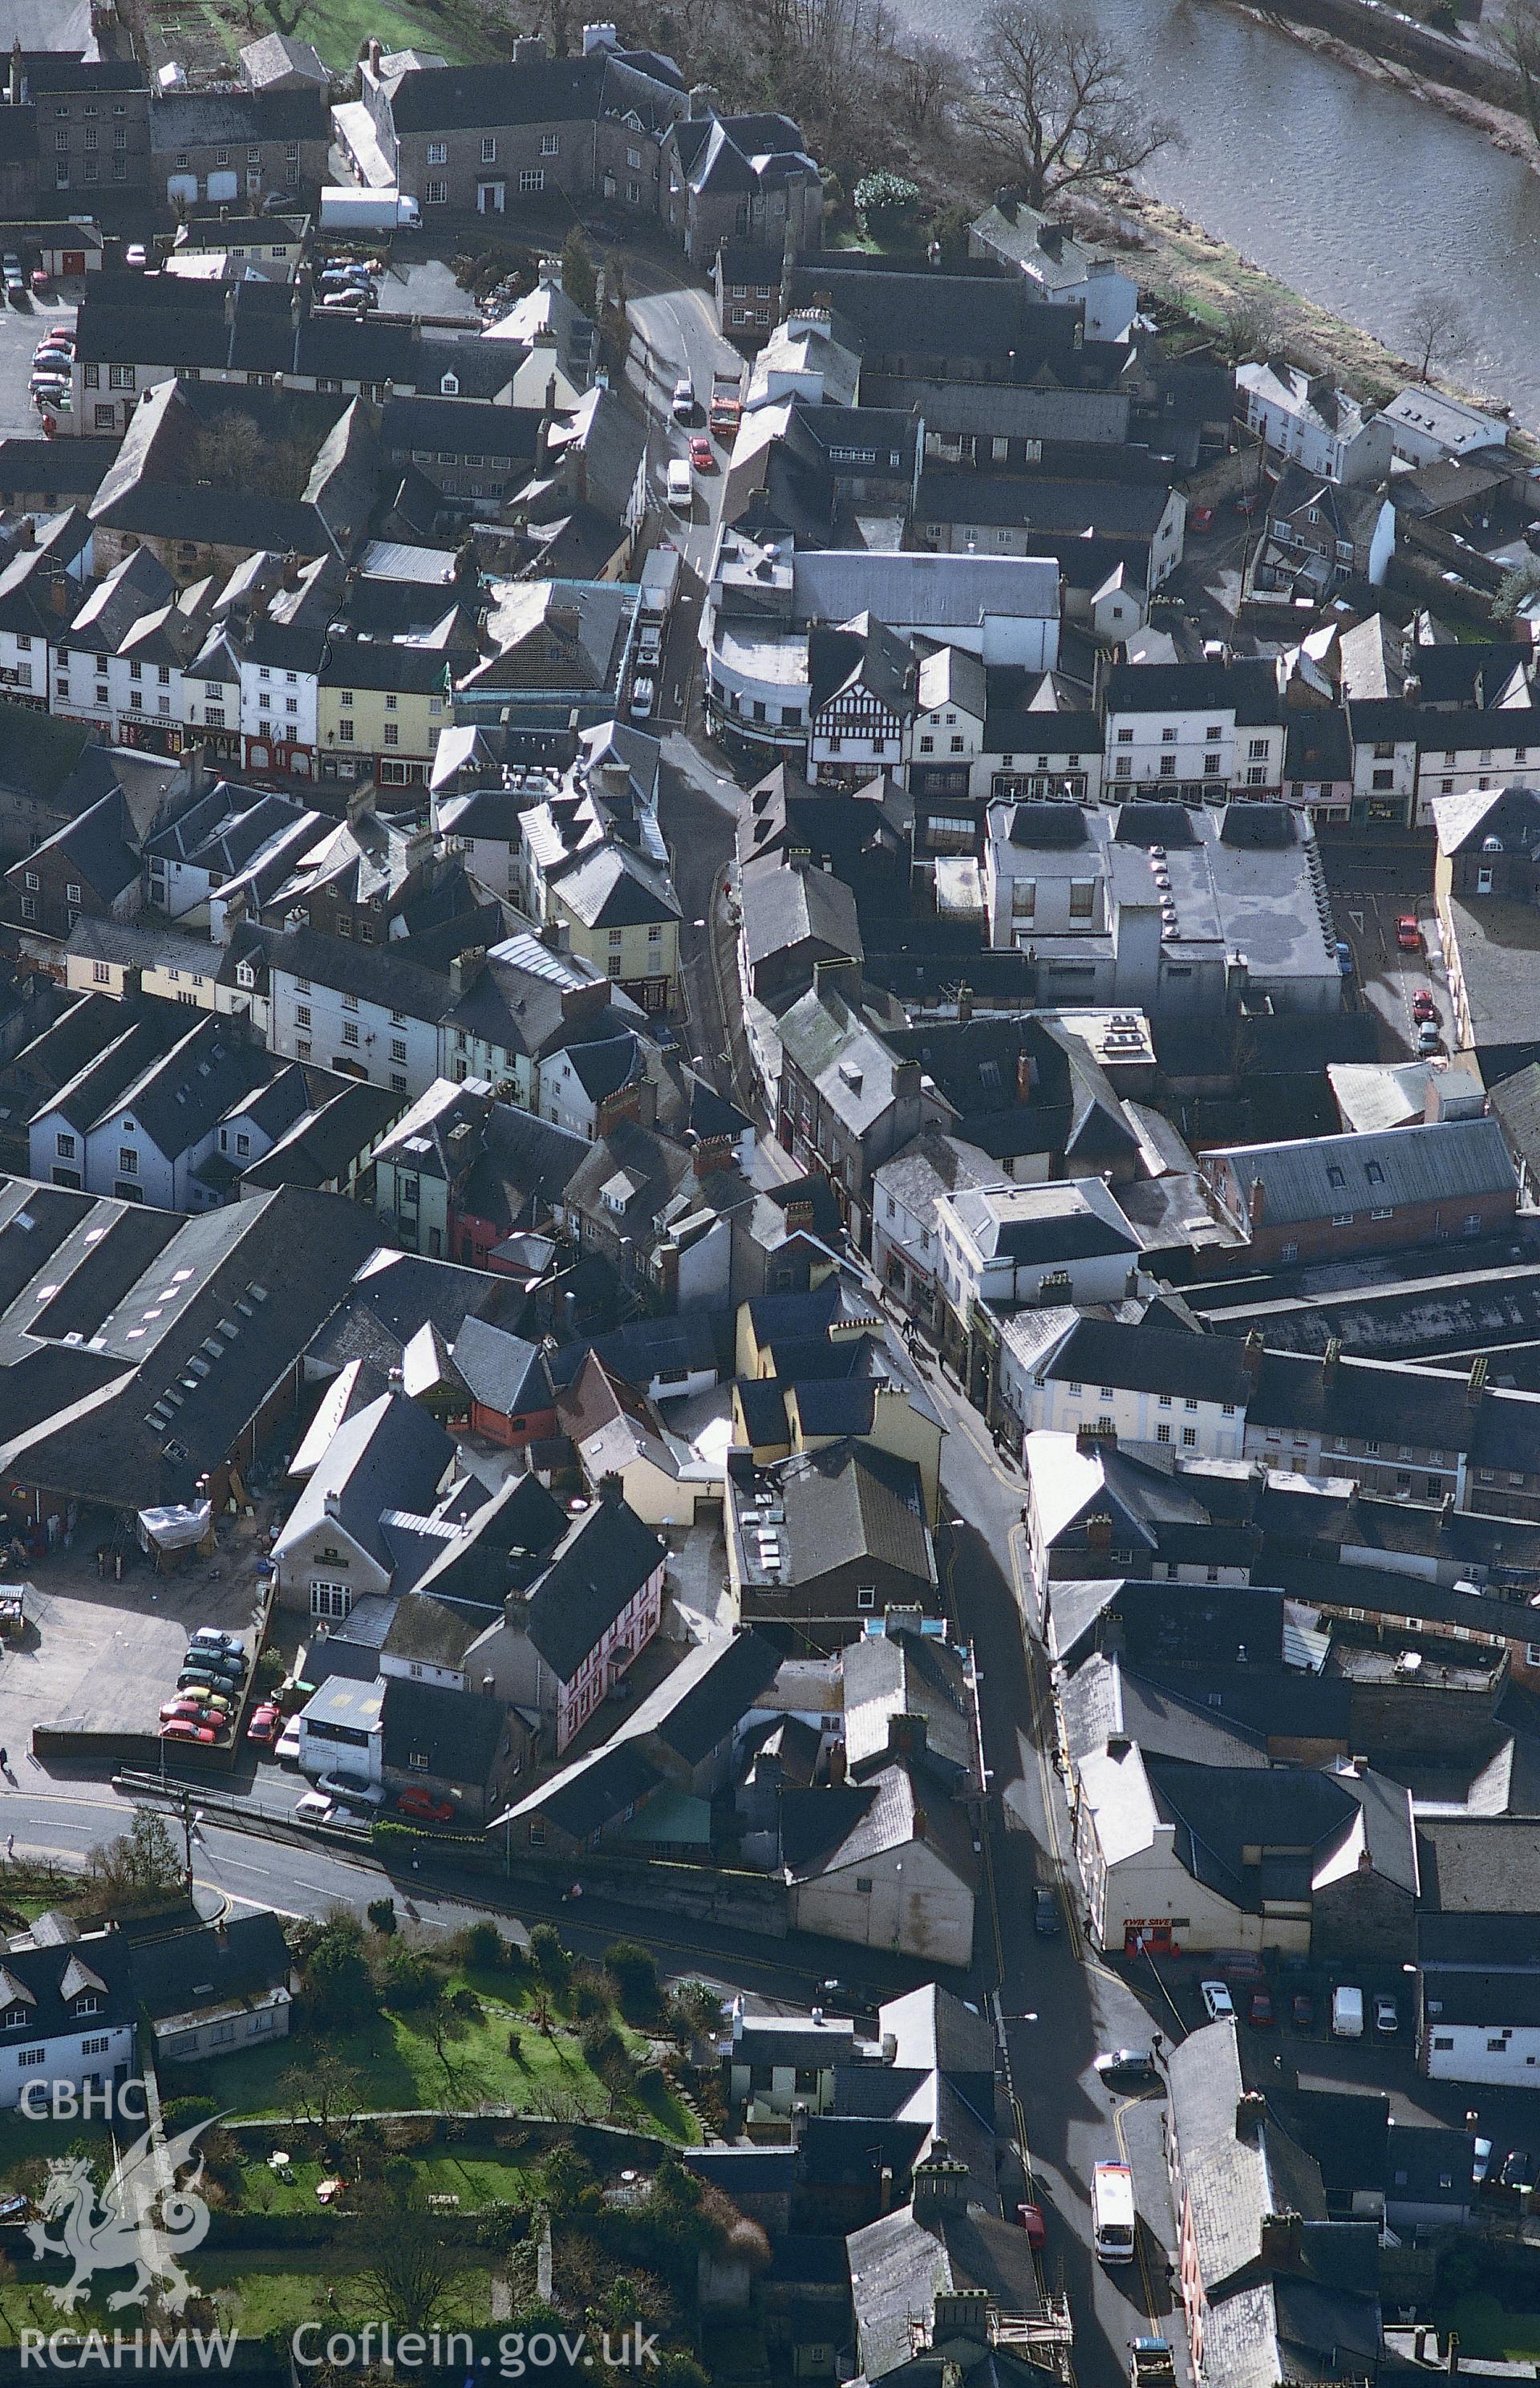 Slide of RCAHMW colour oblique aerial photograph of Brecon, taken by T.G. Driver, 2/1/2001.